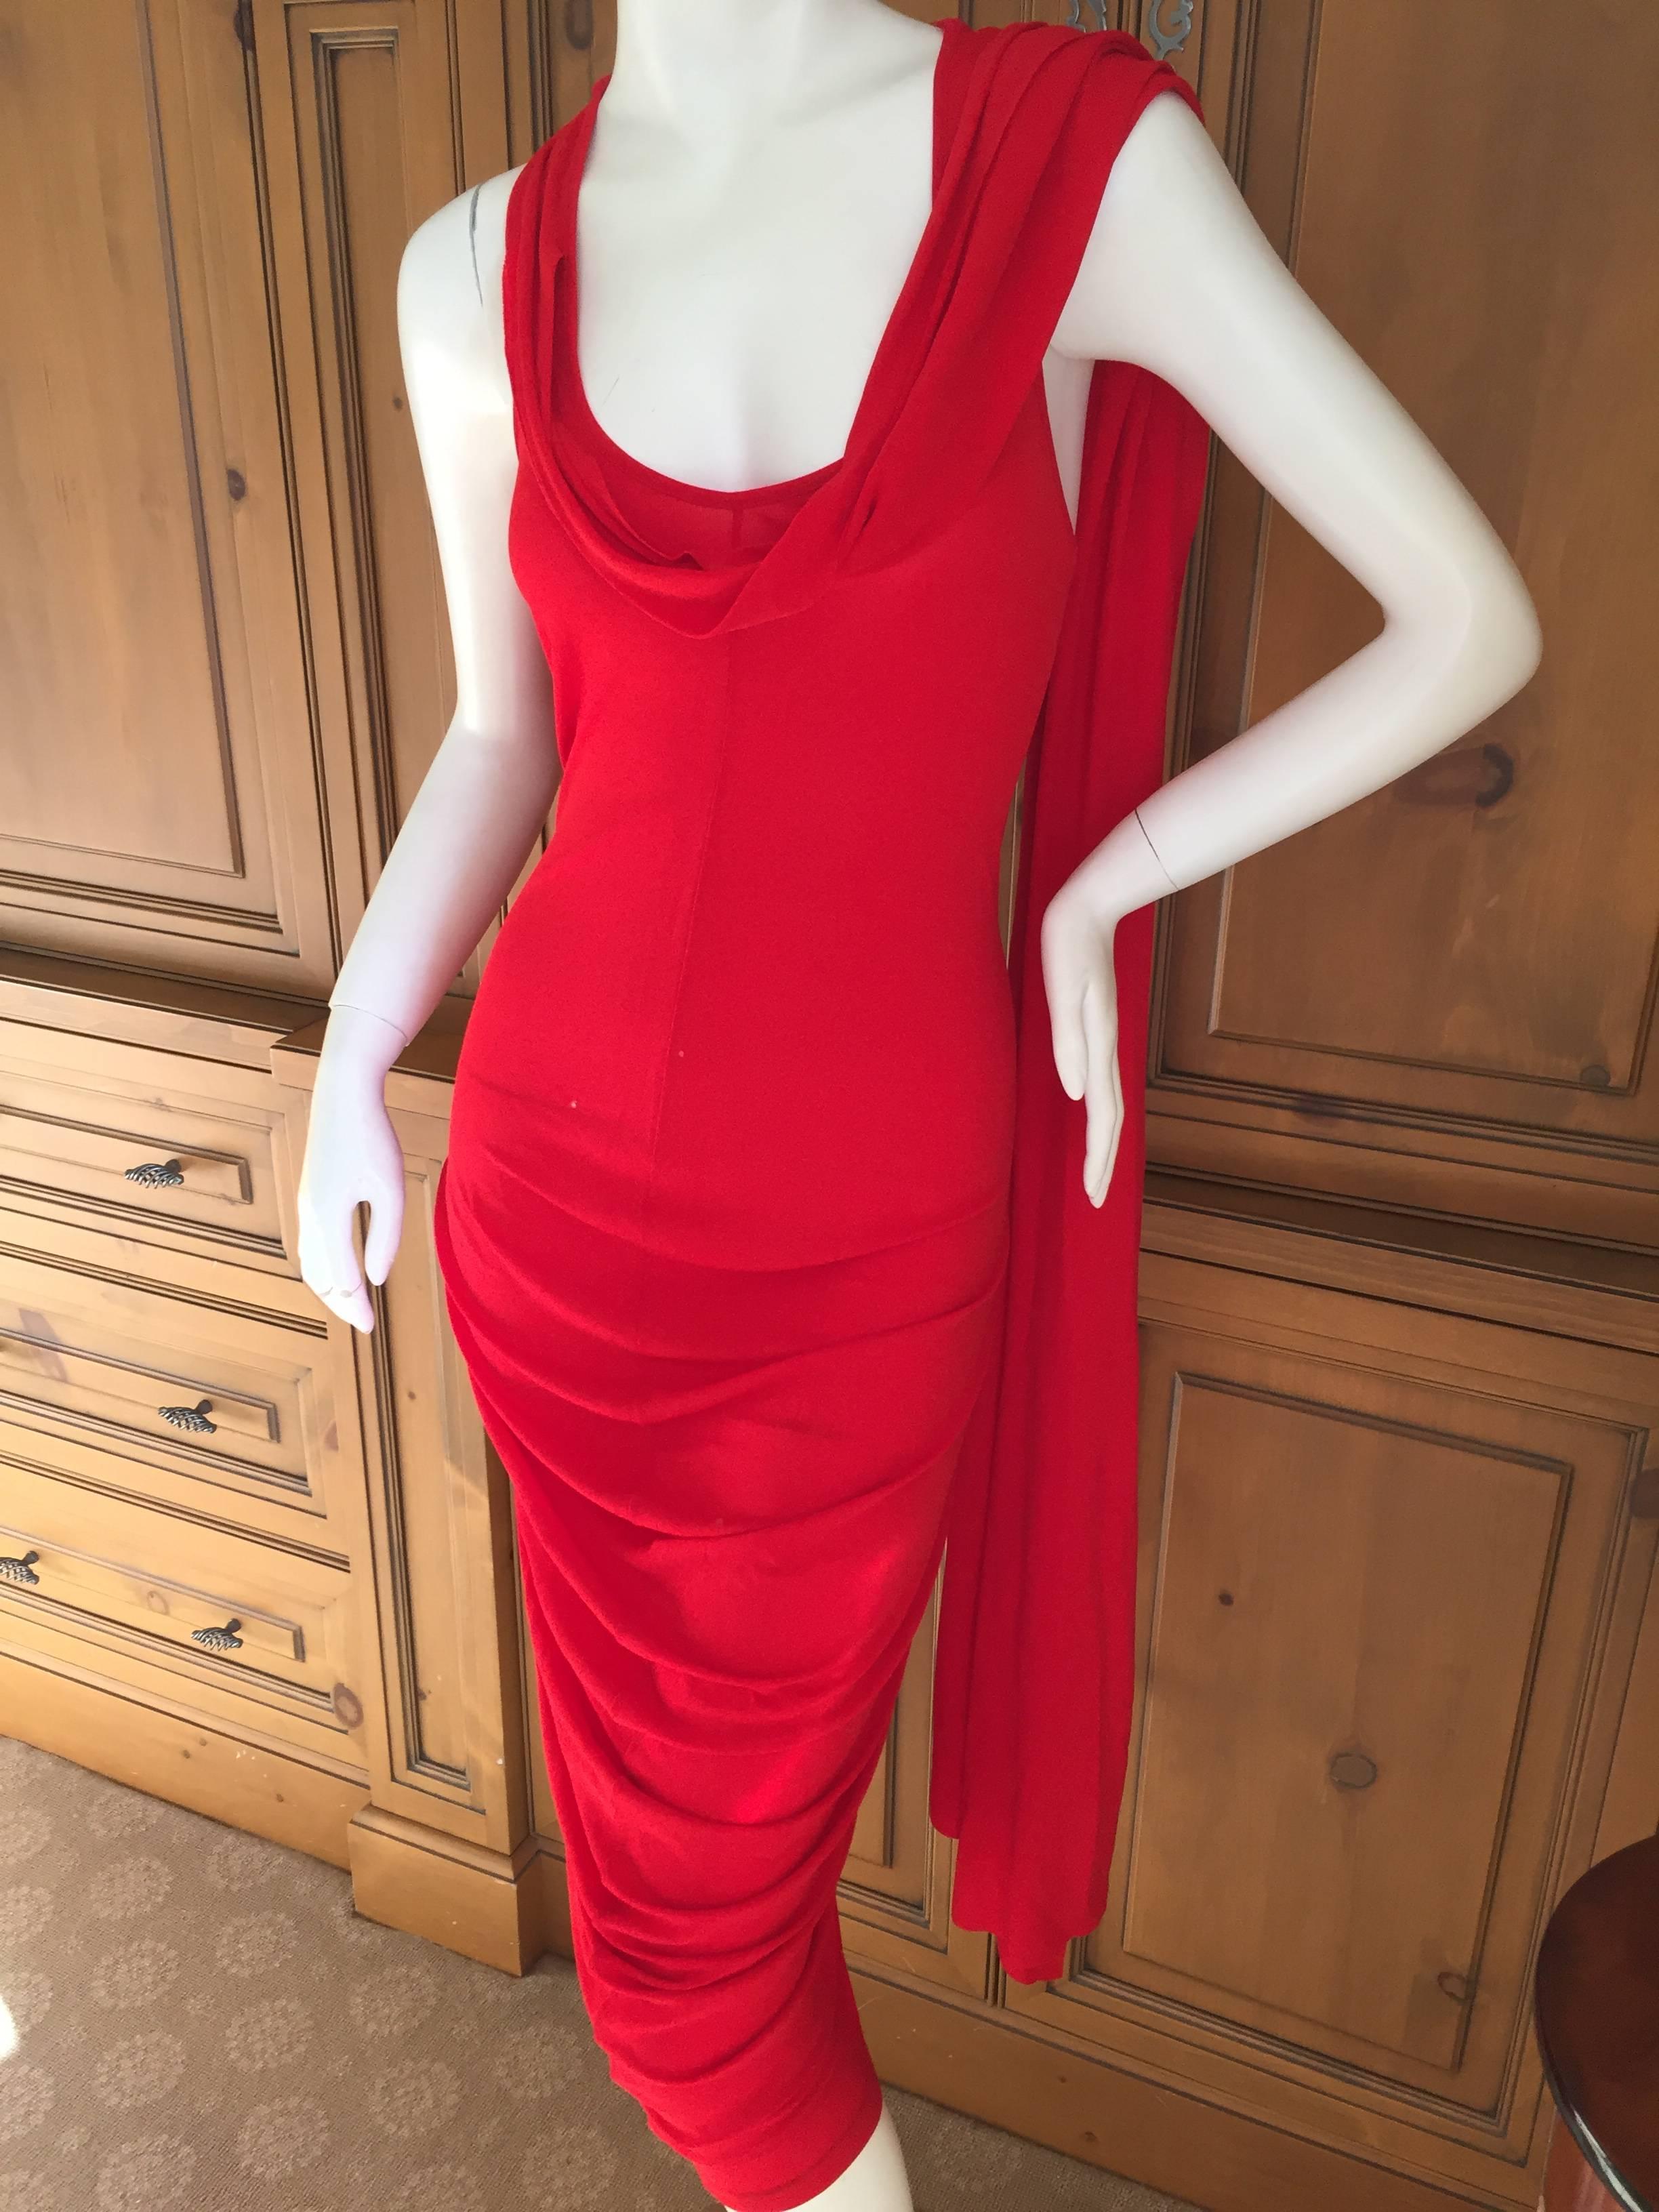 Women's Alexander McQueen Royal Red Dress with Attached Shawl Wrap Size 40